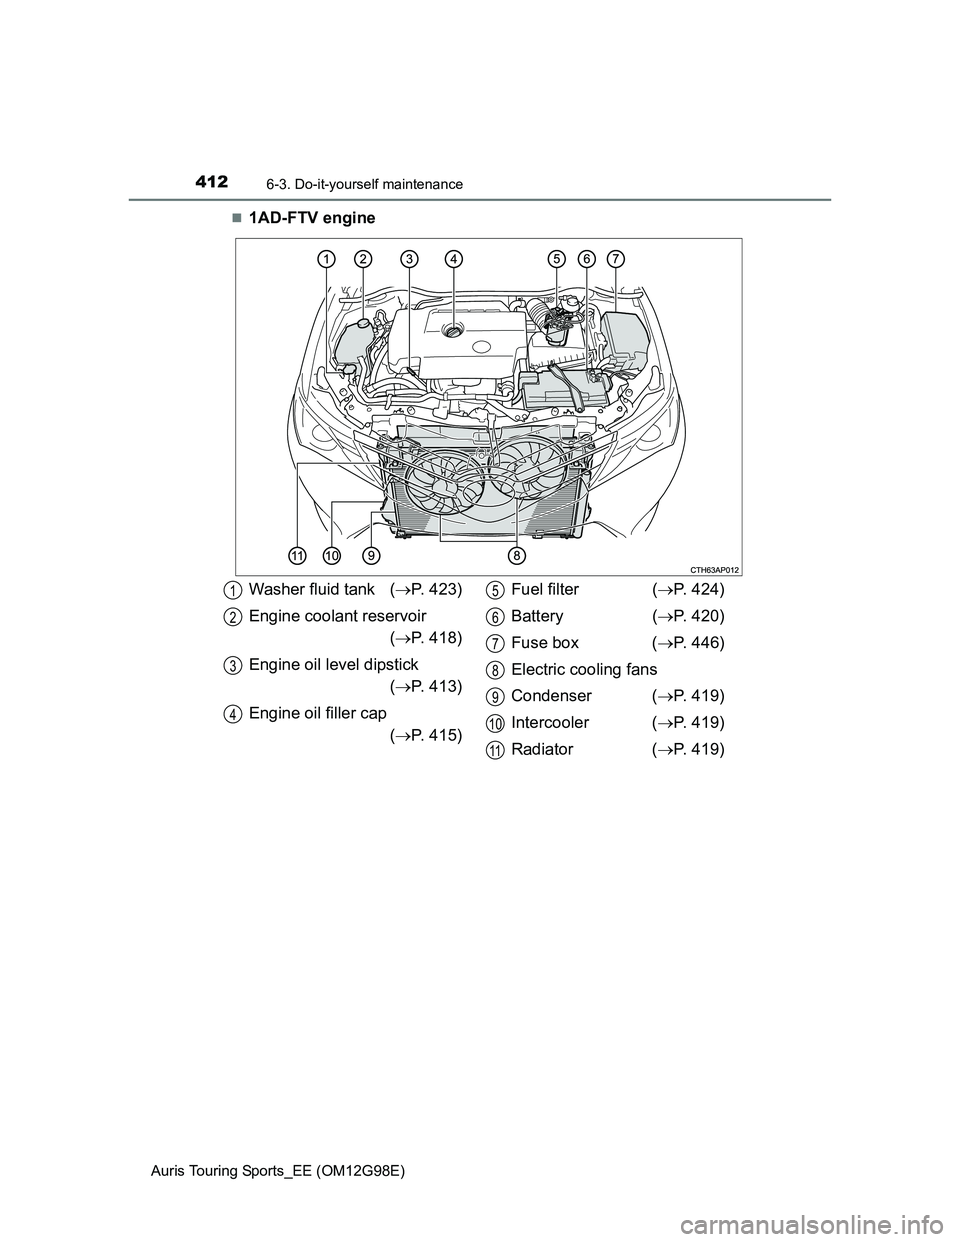 TOYOTA AURIS 2015  Owners Manual (in English) 4126-3. Do-it-yourself maintenance
Auris Touring Sports_EE (OM12G98E)
1AD-FTV engine
Washer fluid tank (P. 423)
Engine coolant reservoir
(P. 418)
Engine oil level dipstick
(P. 413)
Engine 